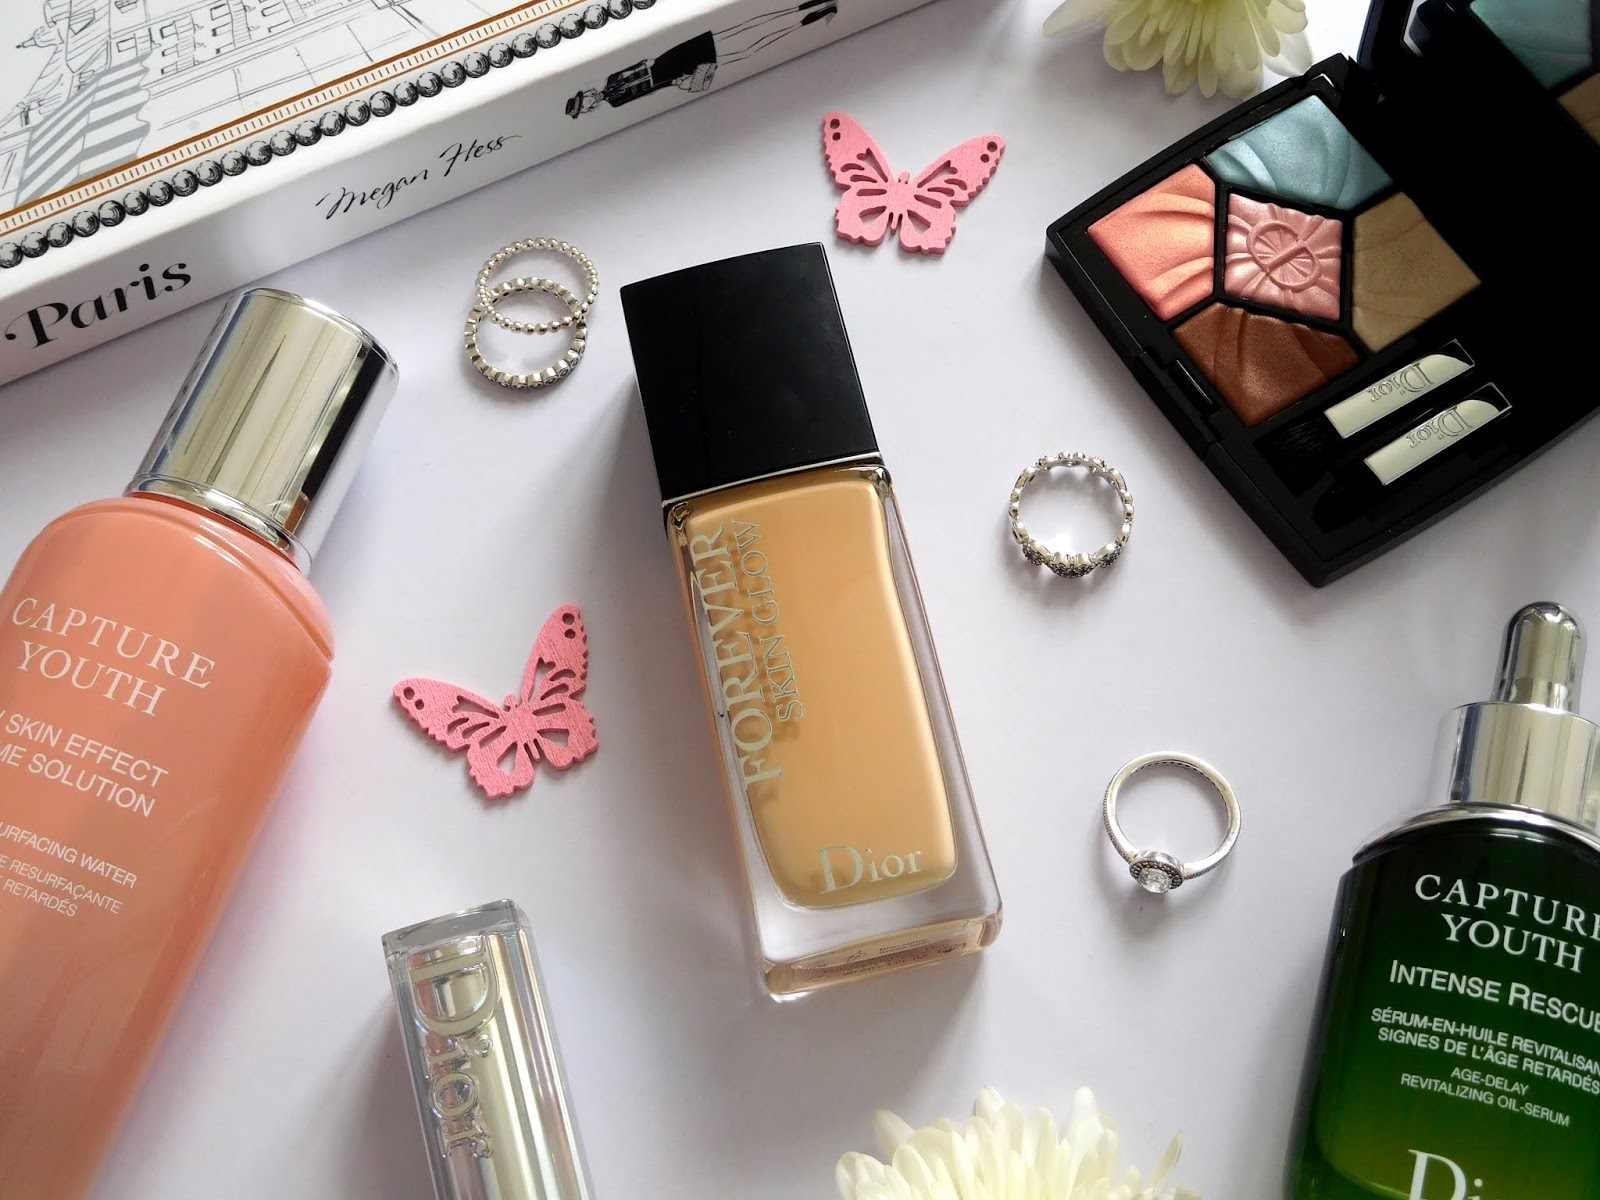 dior forever skin glow foundation review